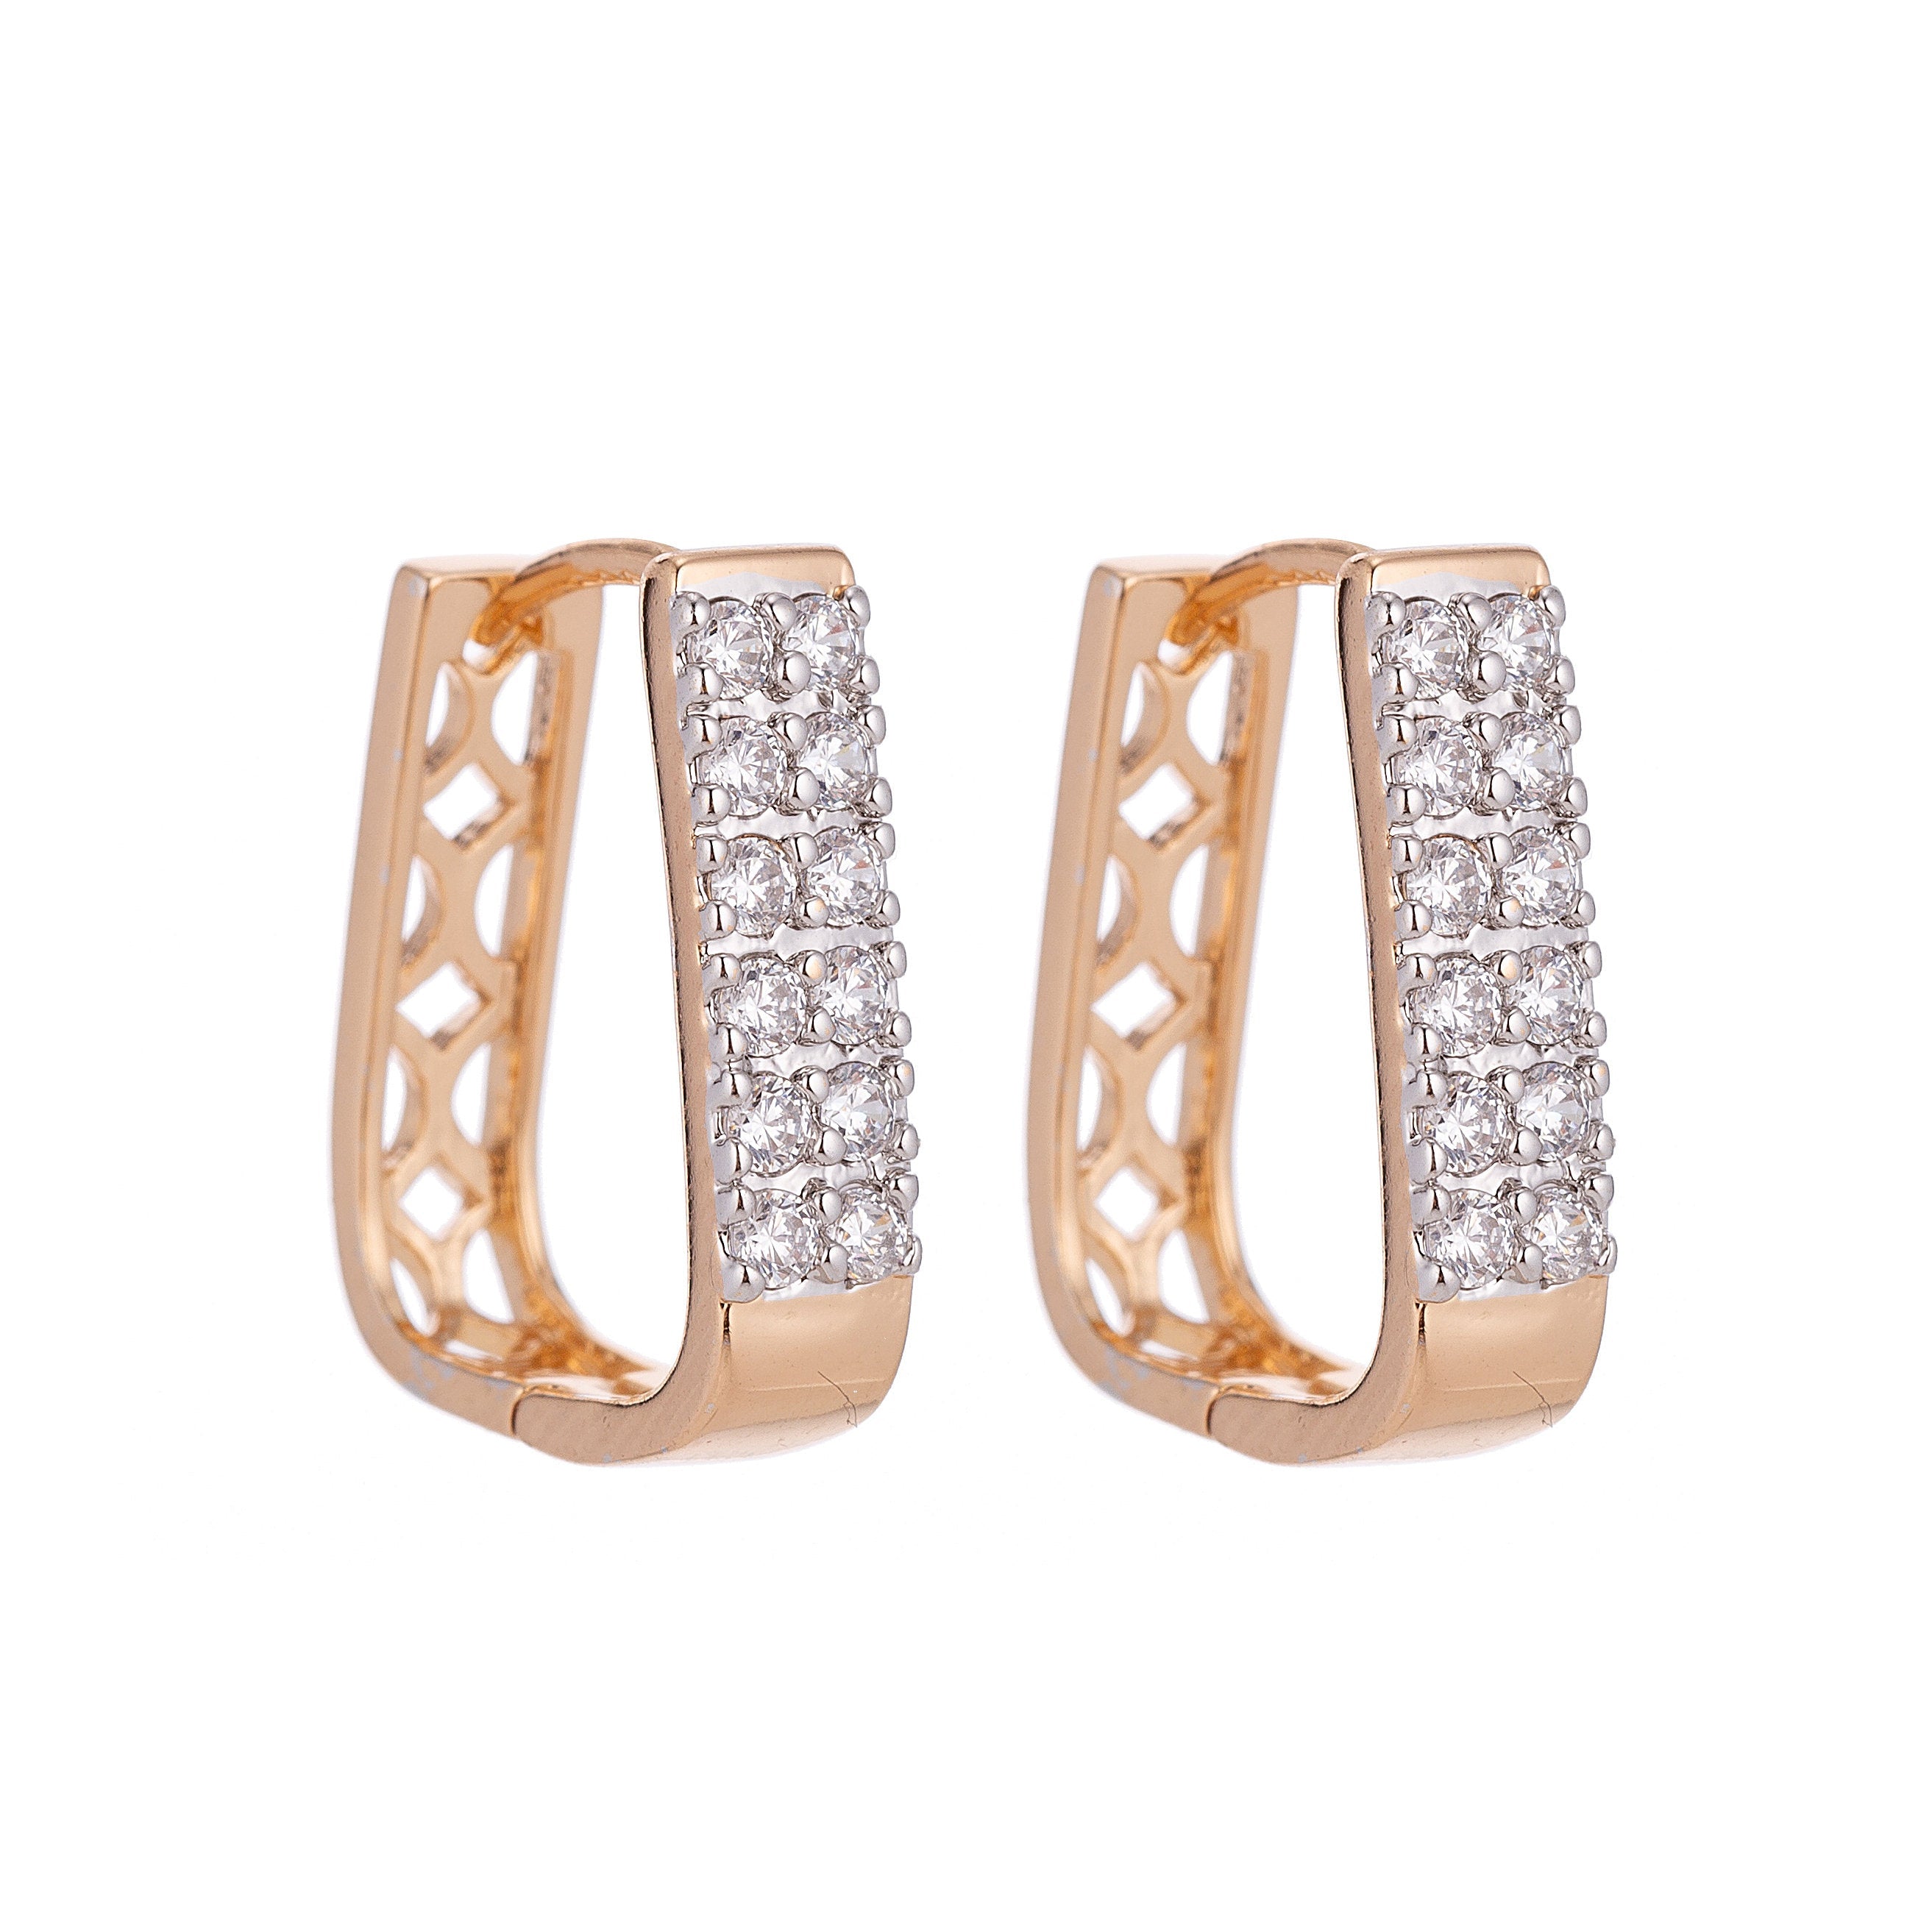 Gold Micro Pave Latch Back Earring, Gold Jewelry, Cubic Zirconia Jewels, Huggie Earring - DLUXCA